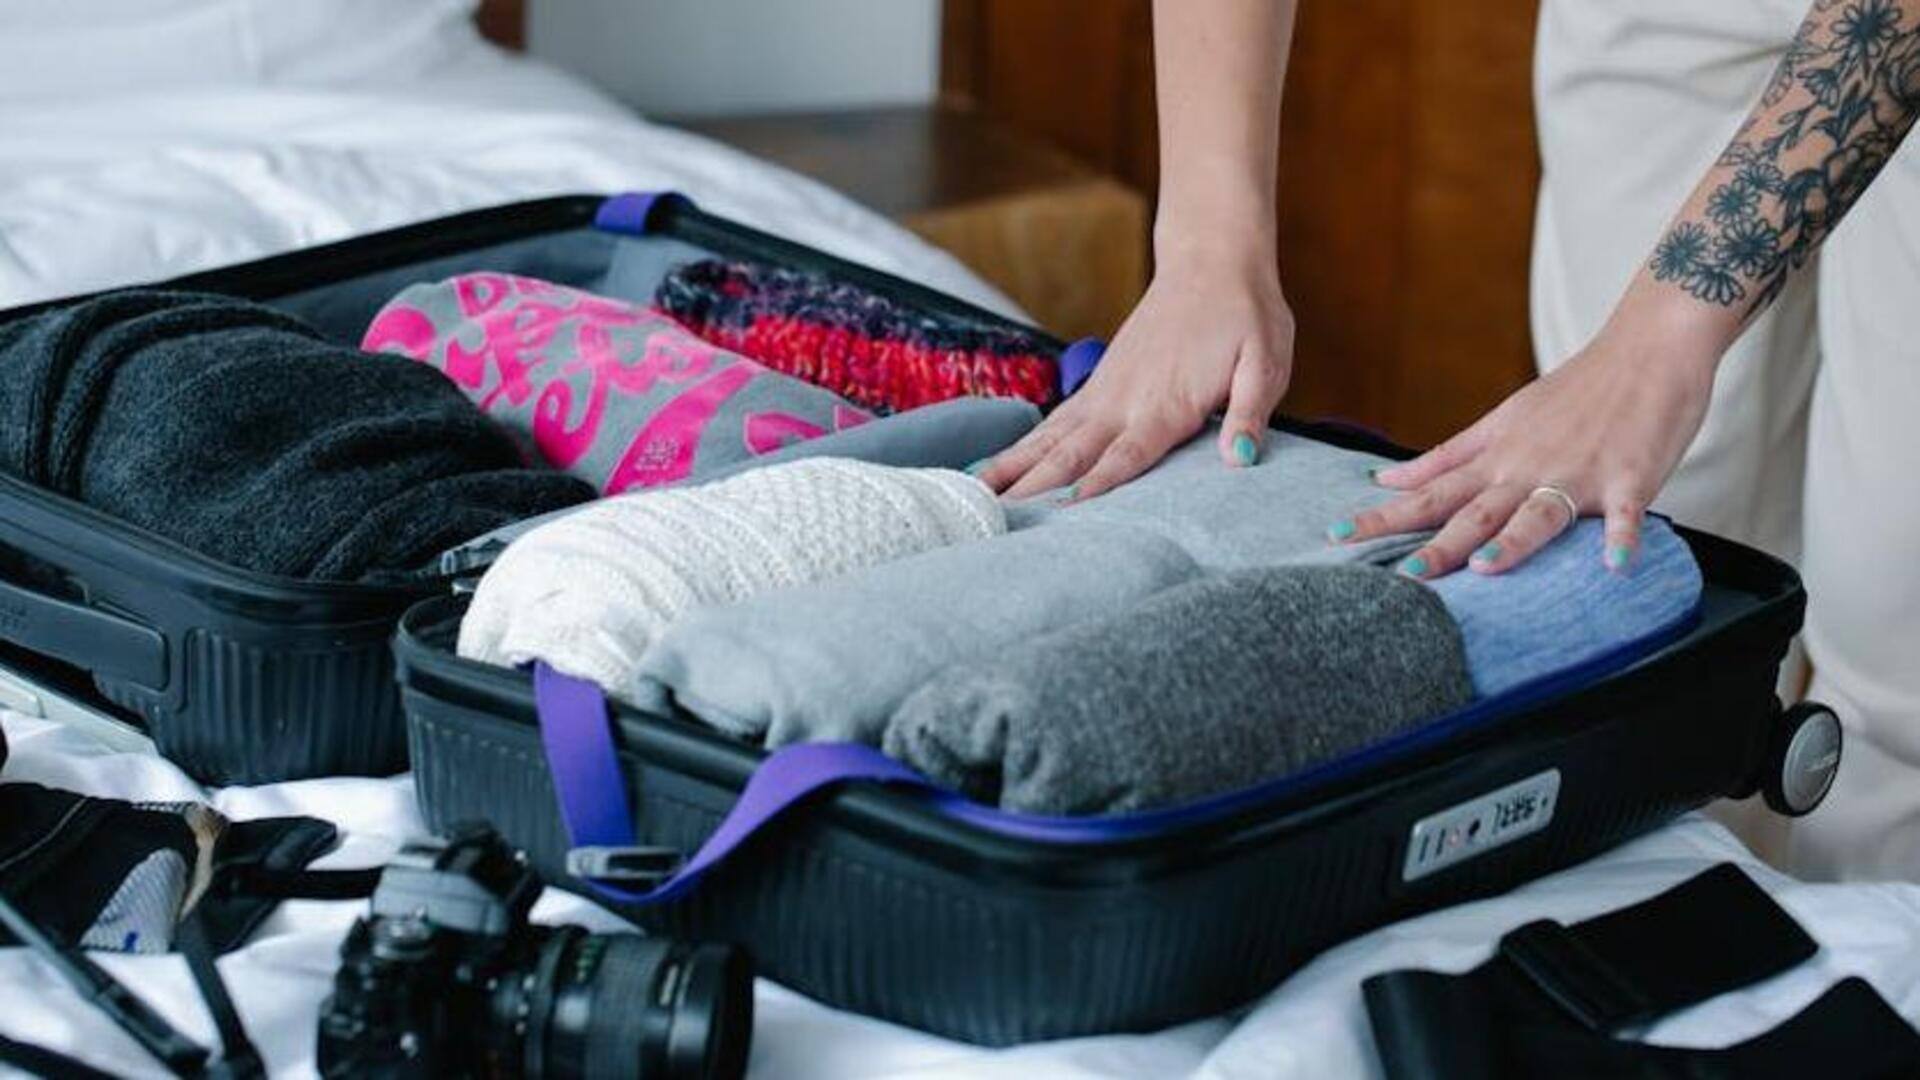 Here's how you can ace multi-climatic packing like a pro